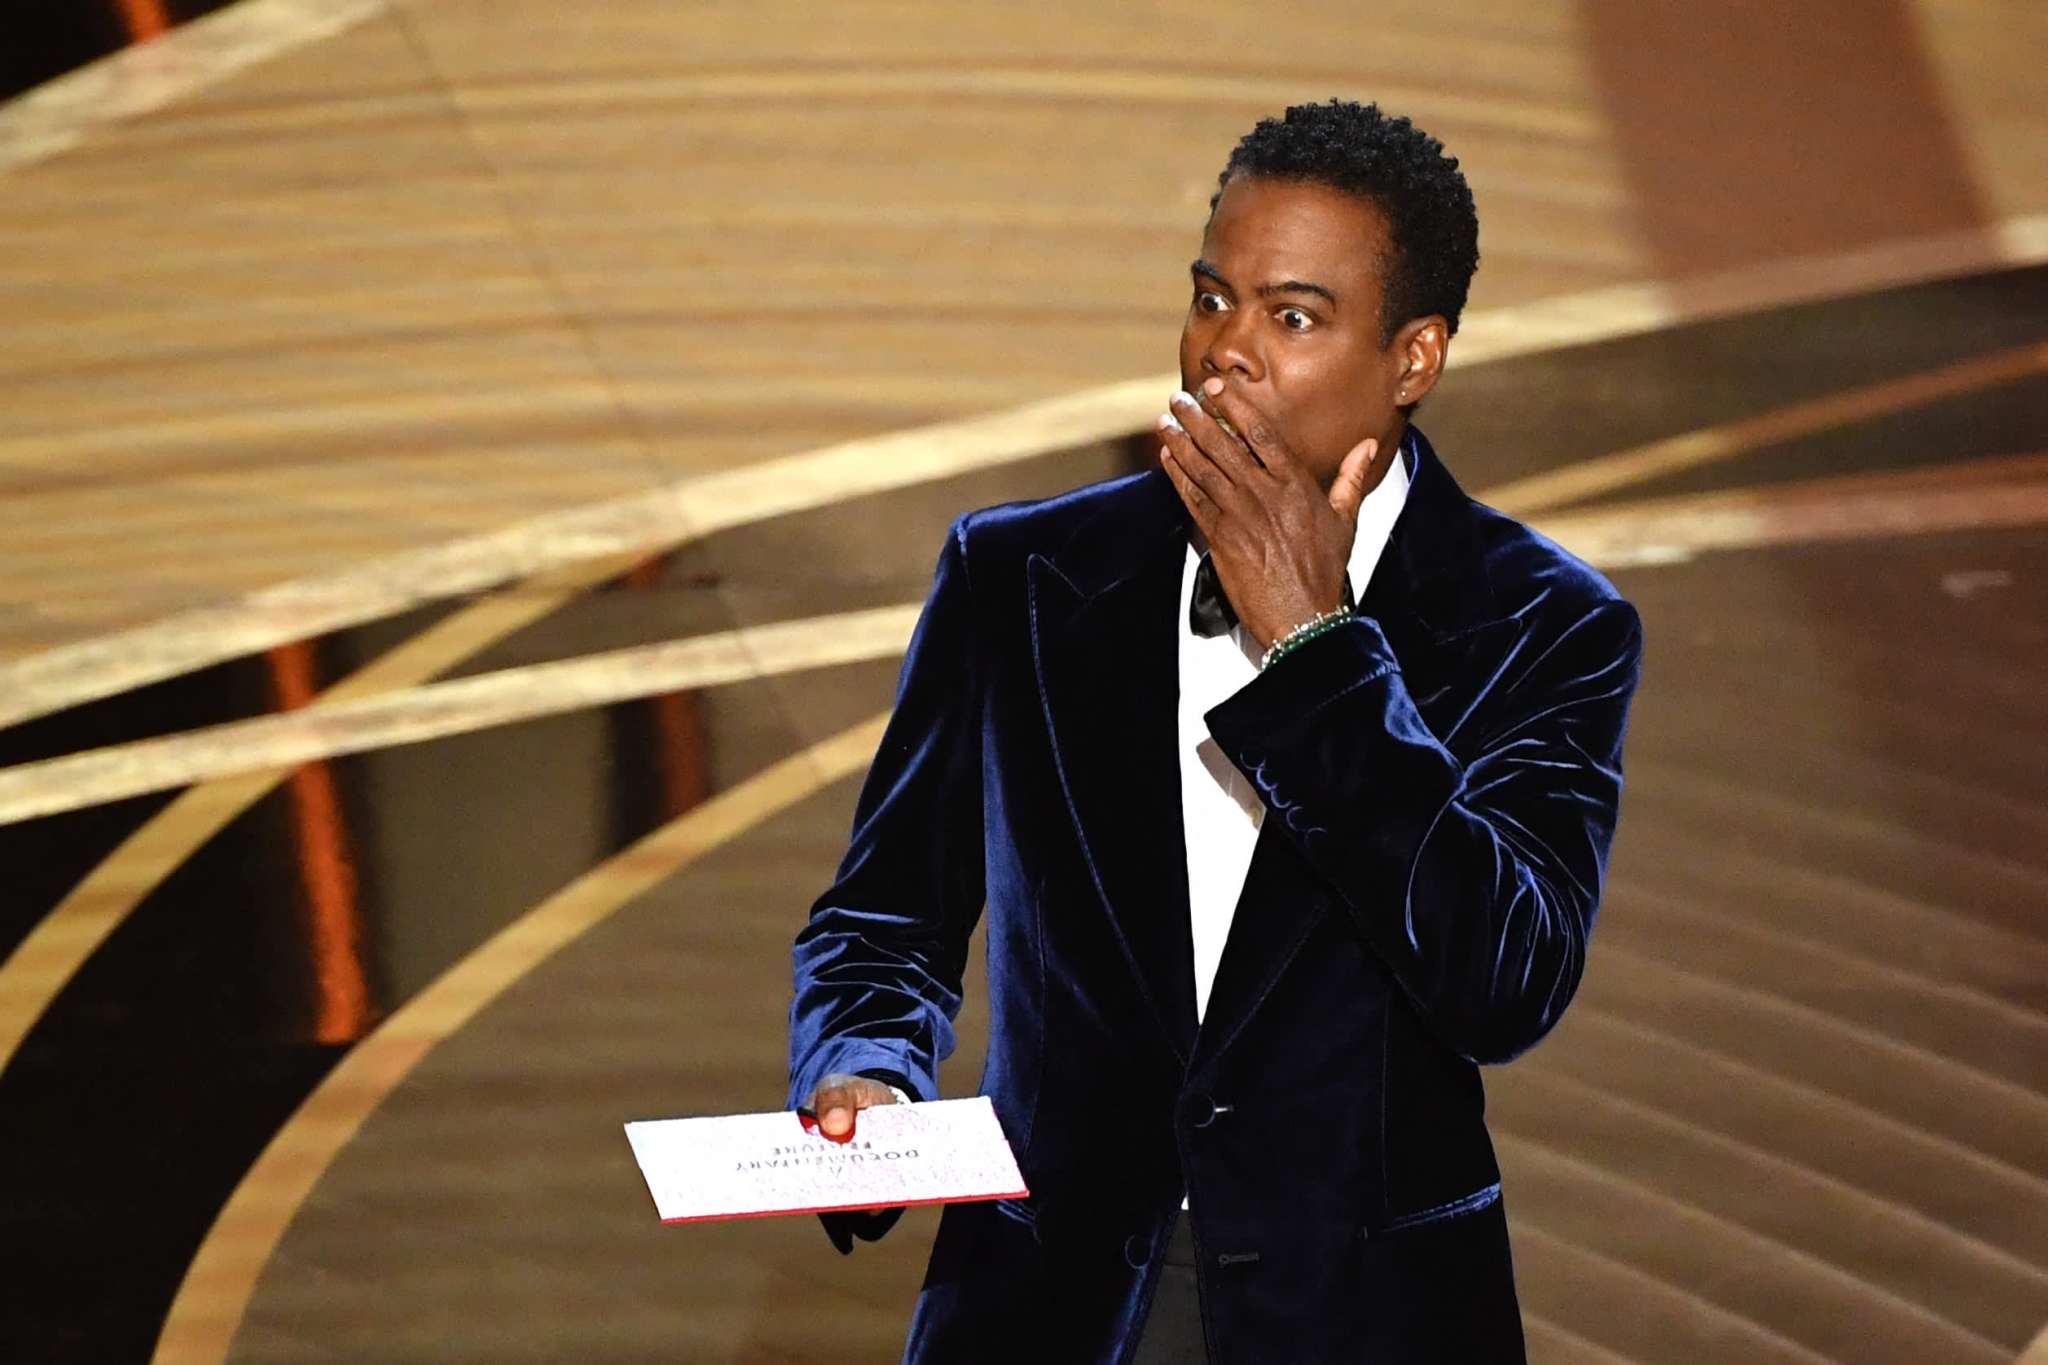 ”chris-rock-explained-he-will-talk-but-only-when-ge-gets-paid”